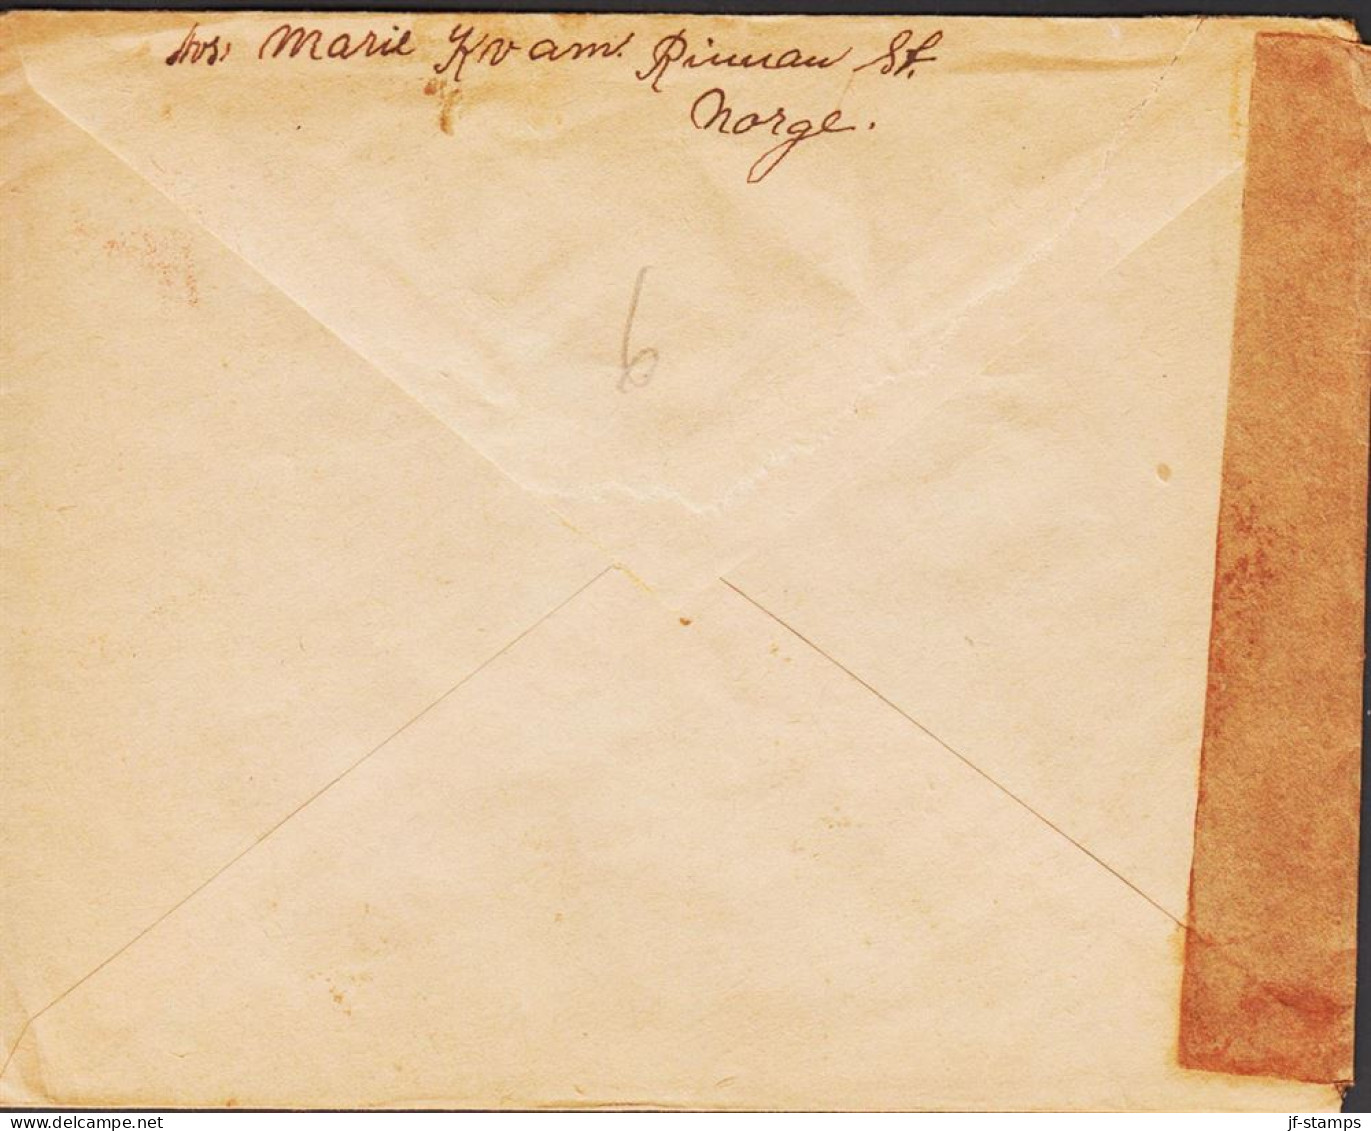 1941. NORGE. Very Interesting Censored Envelope With 20 ØRE Lion Cancelled LEVANGER 26 8 44 T... (MICHEL 184) - JF545681 - Cartas & Documentos